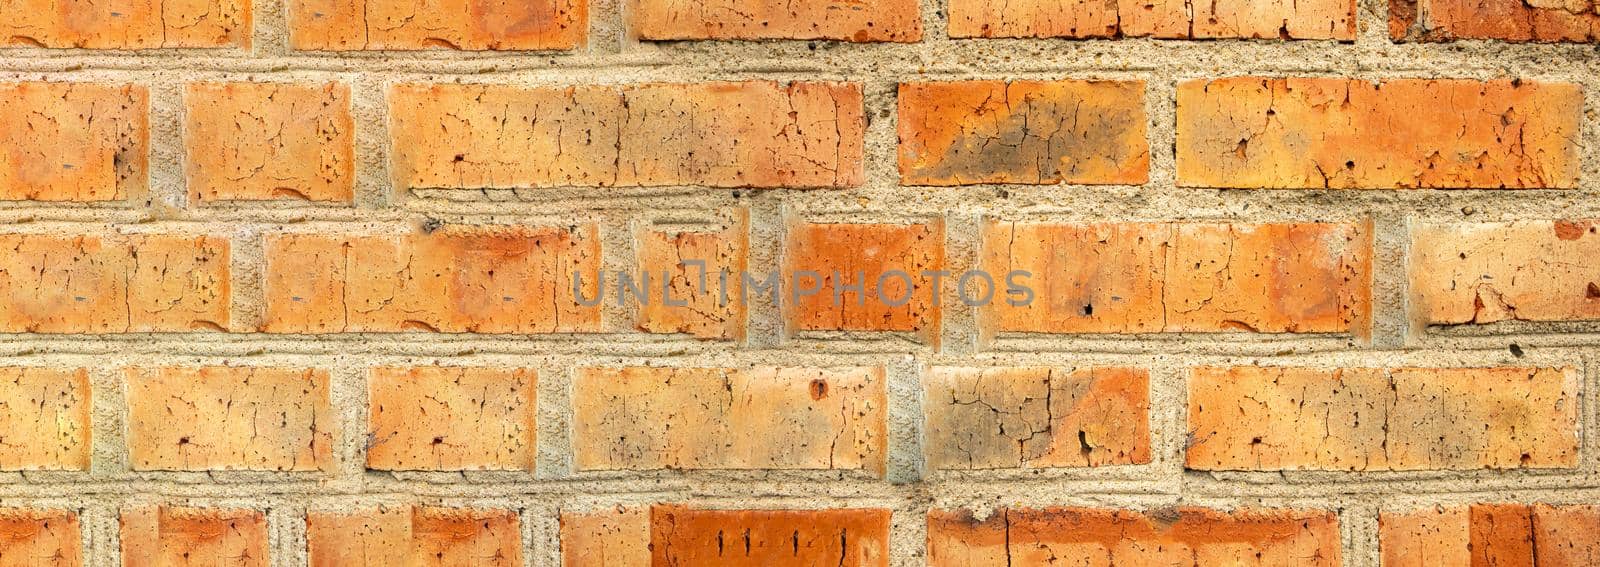 Banner background of old brown brick wall, vintage brickwork texture, close-up by claire_lucia